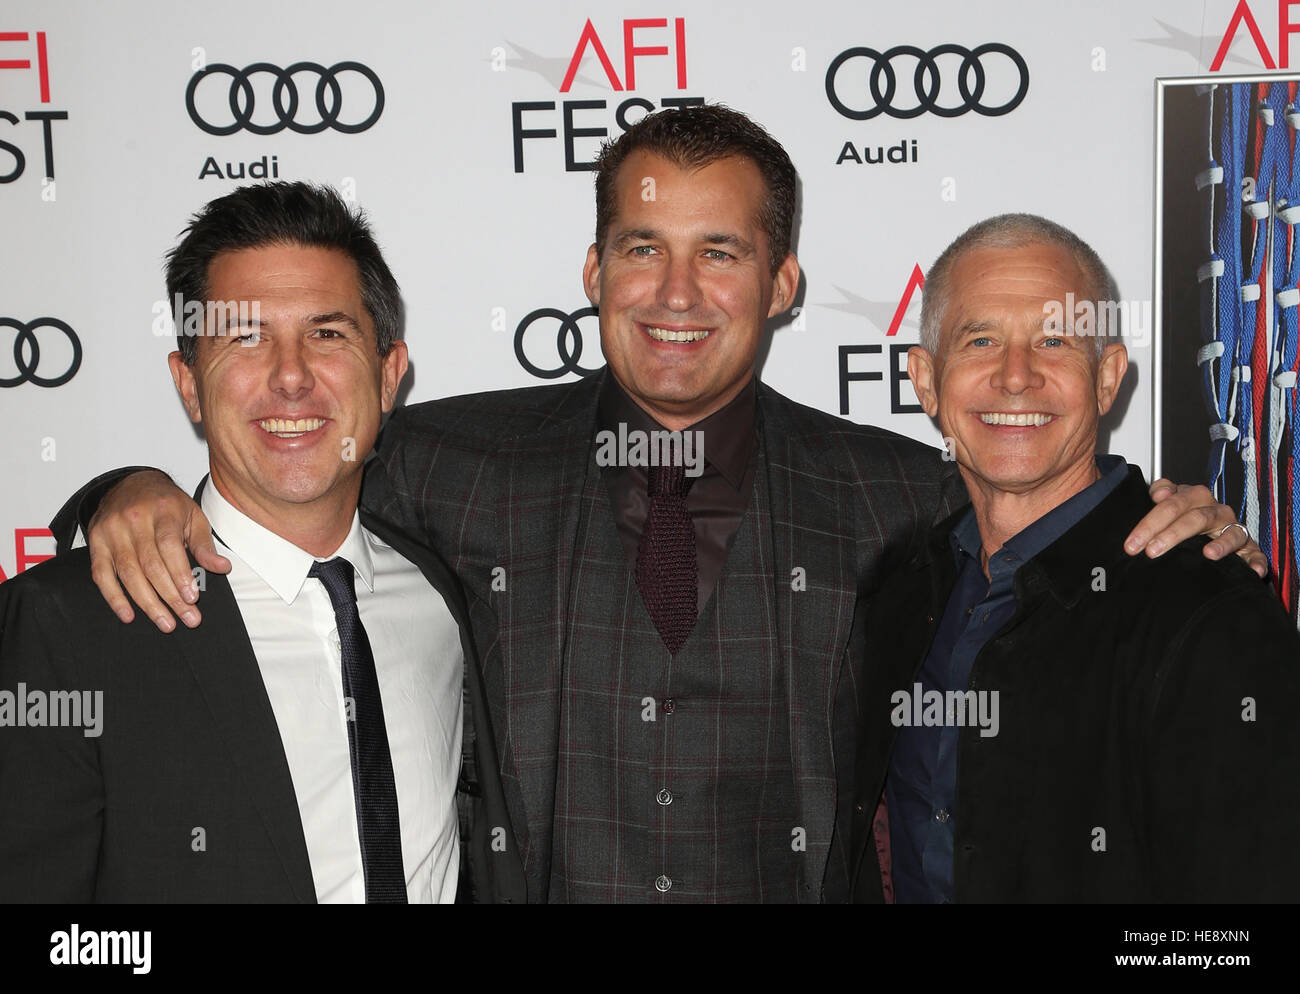 AFI FEST 2016 - Closing Gala - Premiere Of 'Patriot's Day'  Featuring: Dylan Clark, Scott Stuber, Hutch Parker Where: Hollywood, California, United States When: 17 Nov 2016 Stock Photo